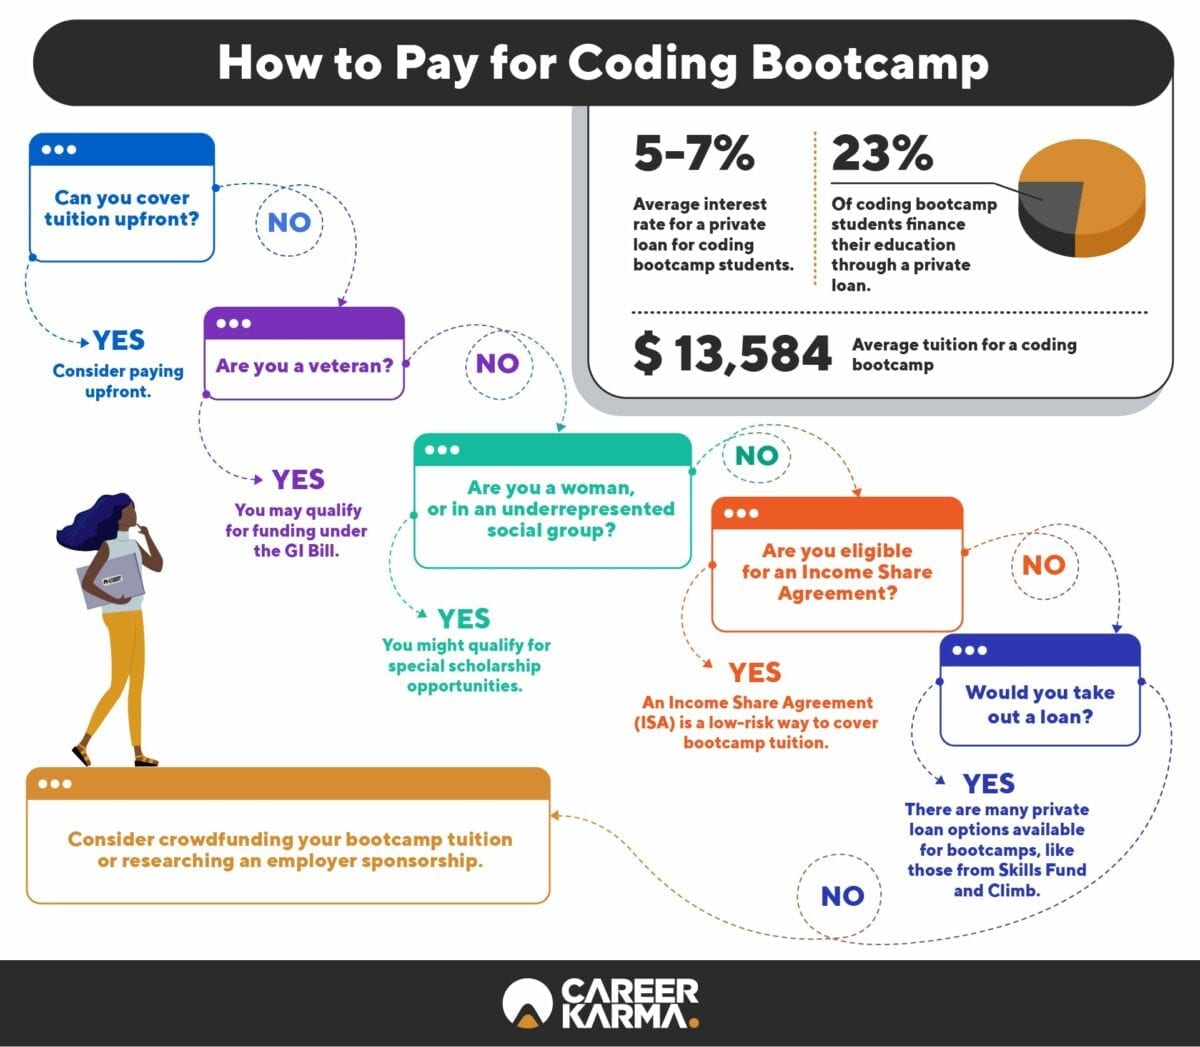 How to Pay for Coding Bootcamp: Financial Aid for Coding Bootcamps?